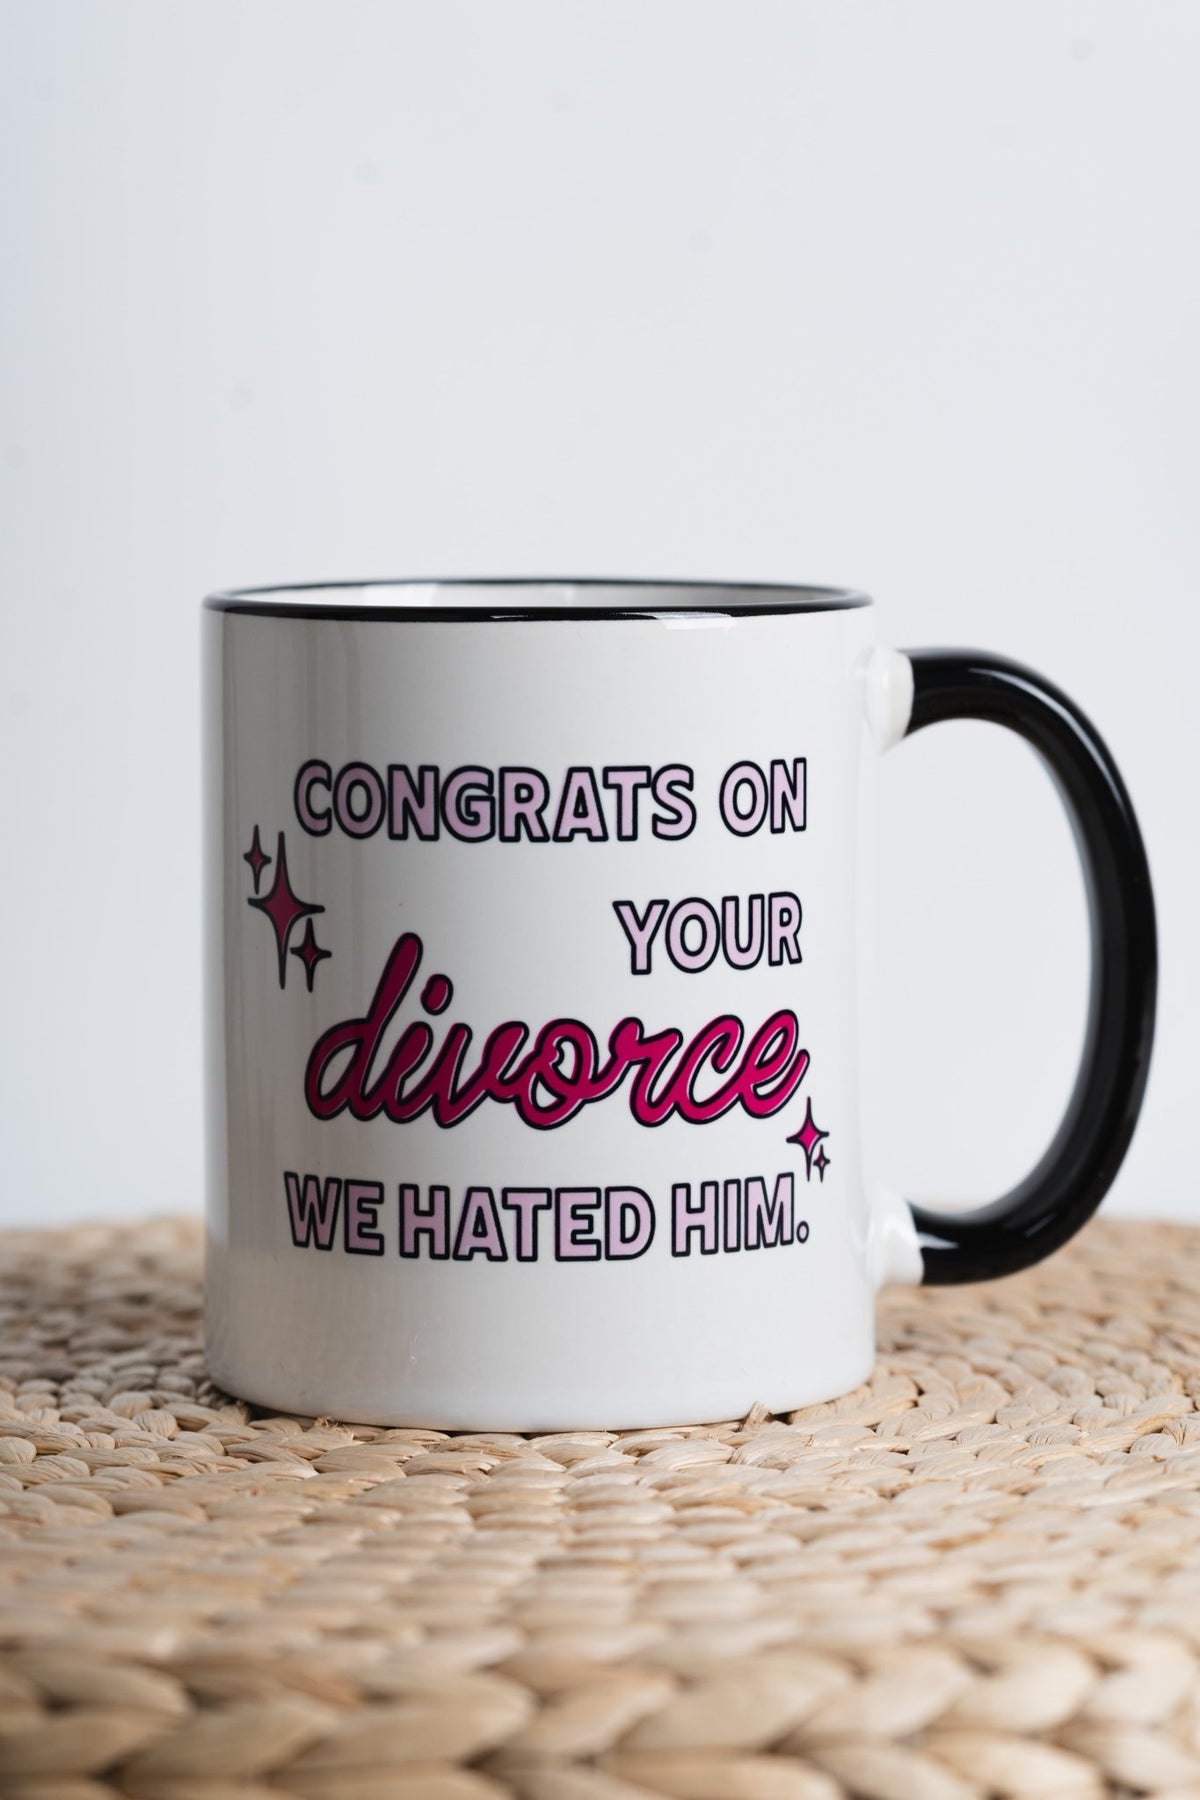 Mugsby congrats on your divorce coffee mug - Trendy Tumblers, Mugs and Cups at Lush Fashion Lounge Boutique in Oklahoma City